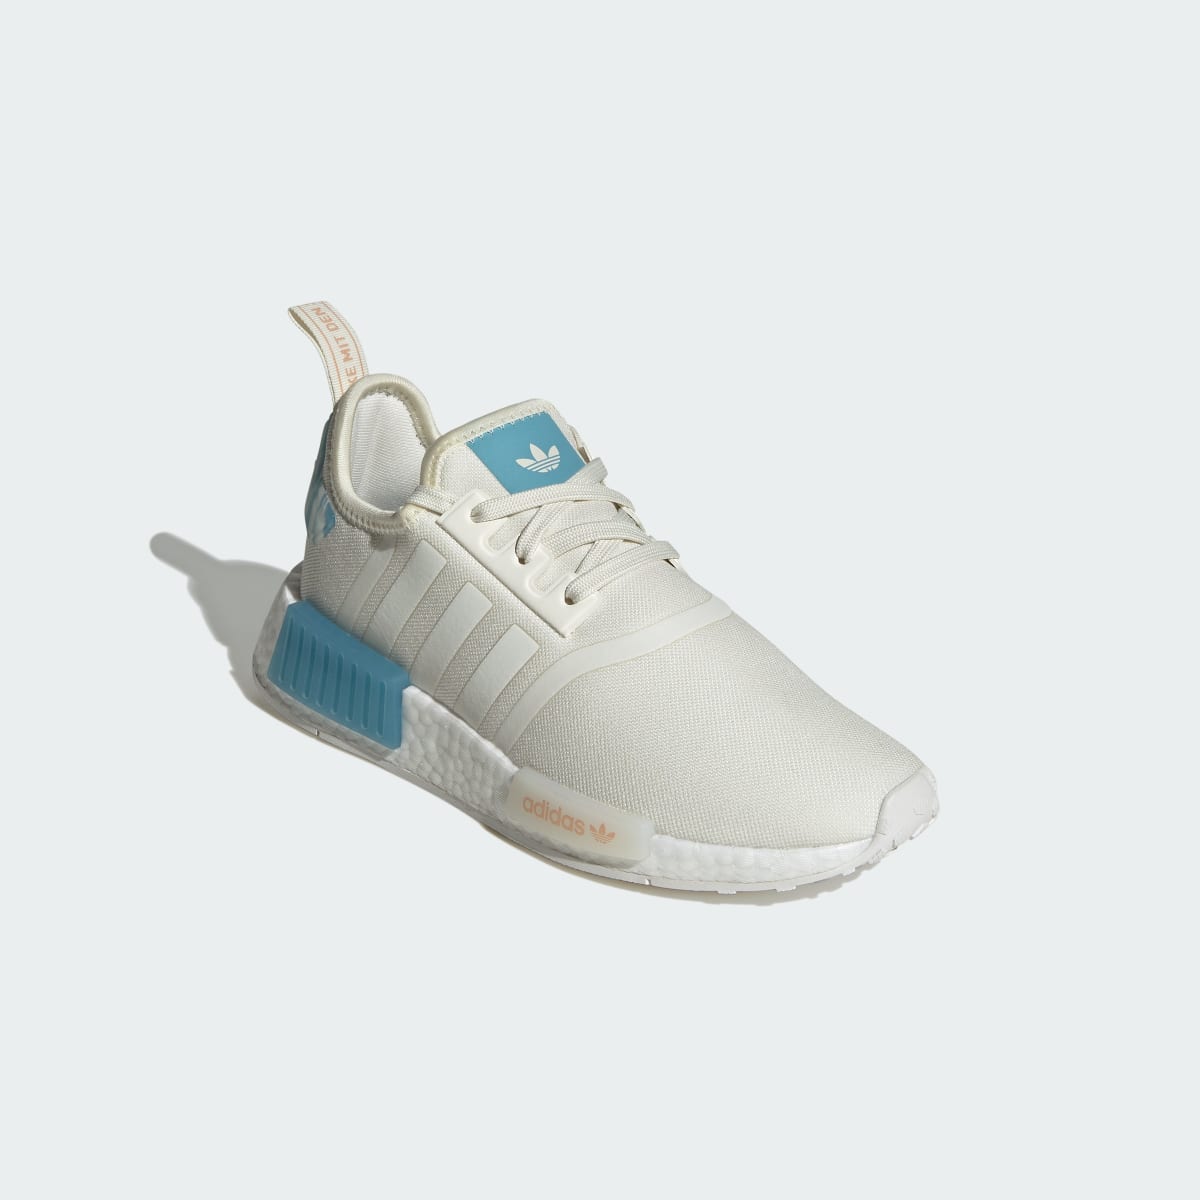 Adidas NMD_R1 Shoes. 5